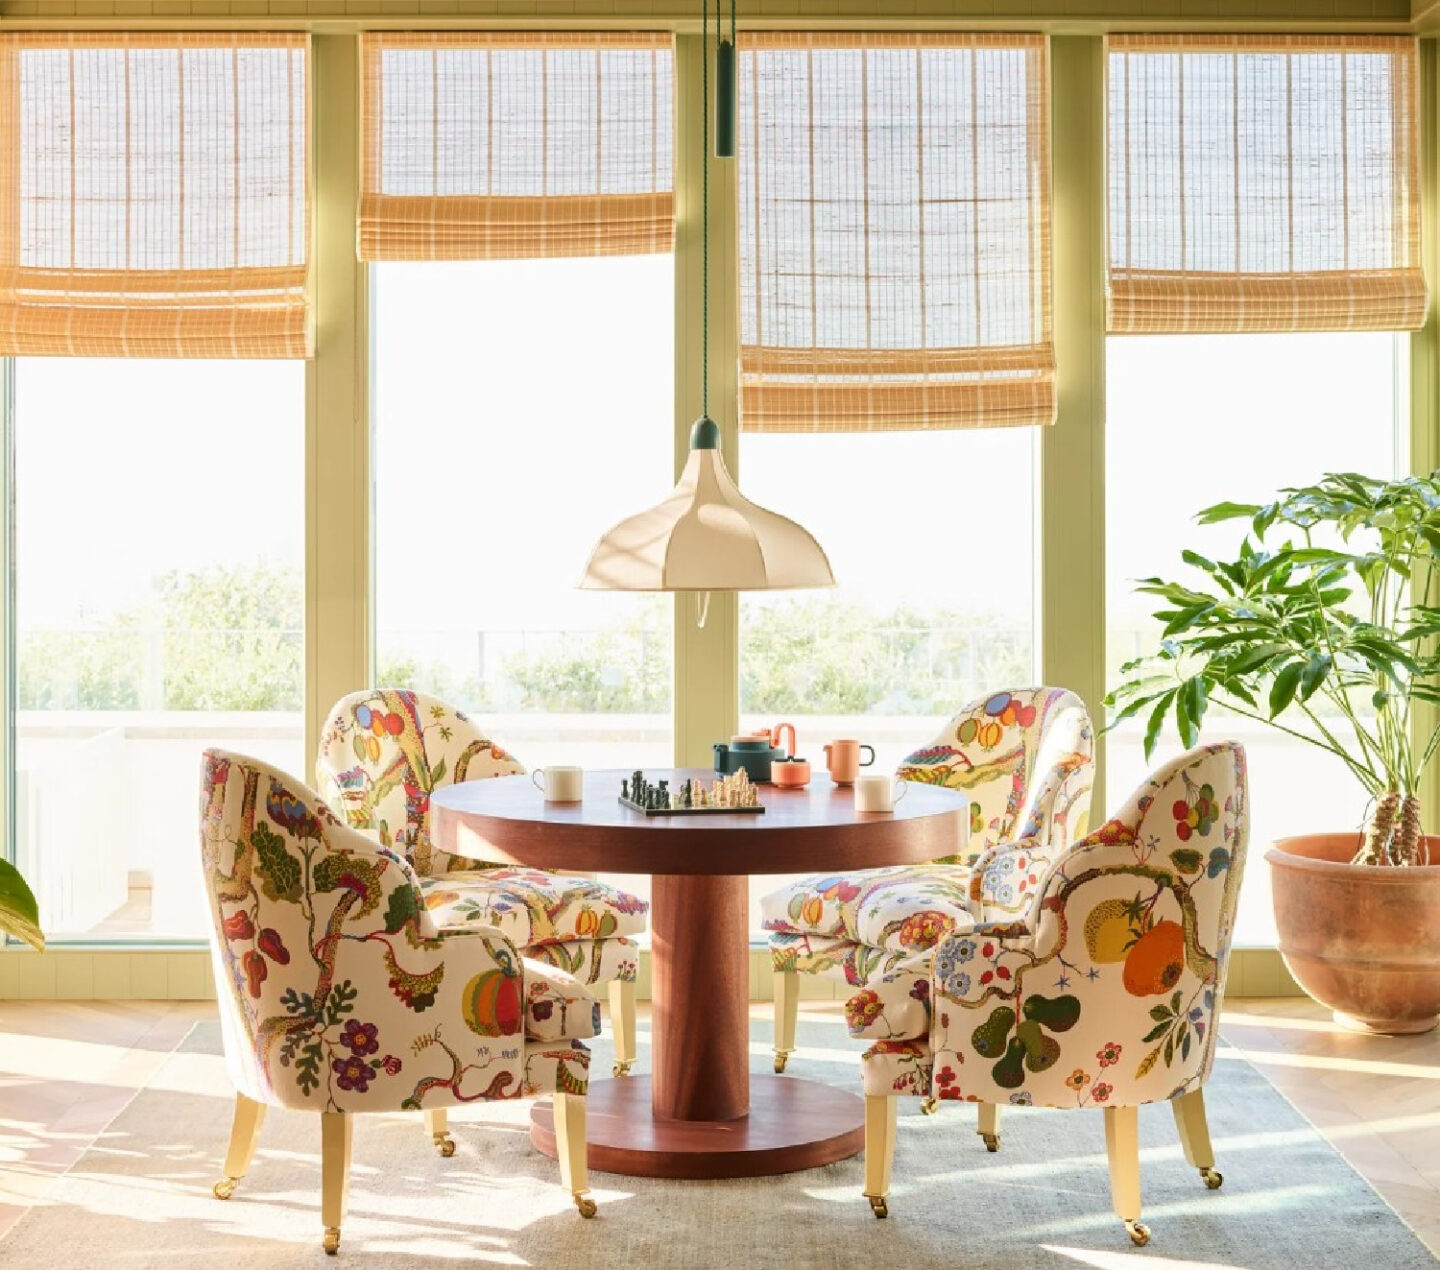 Gorgeous sun room with cheery floral chairs, green paneled walls and woven shades - Beata Heuman design, Robert Rieger photo.